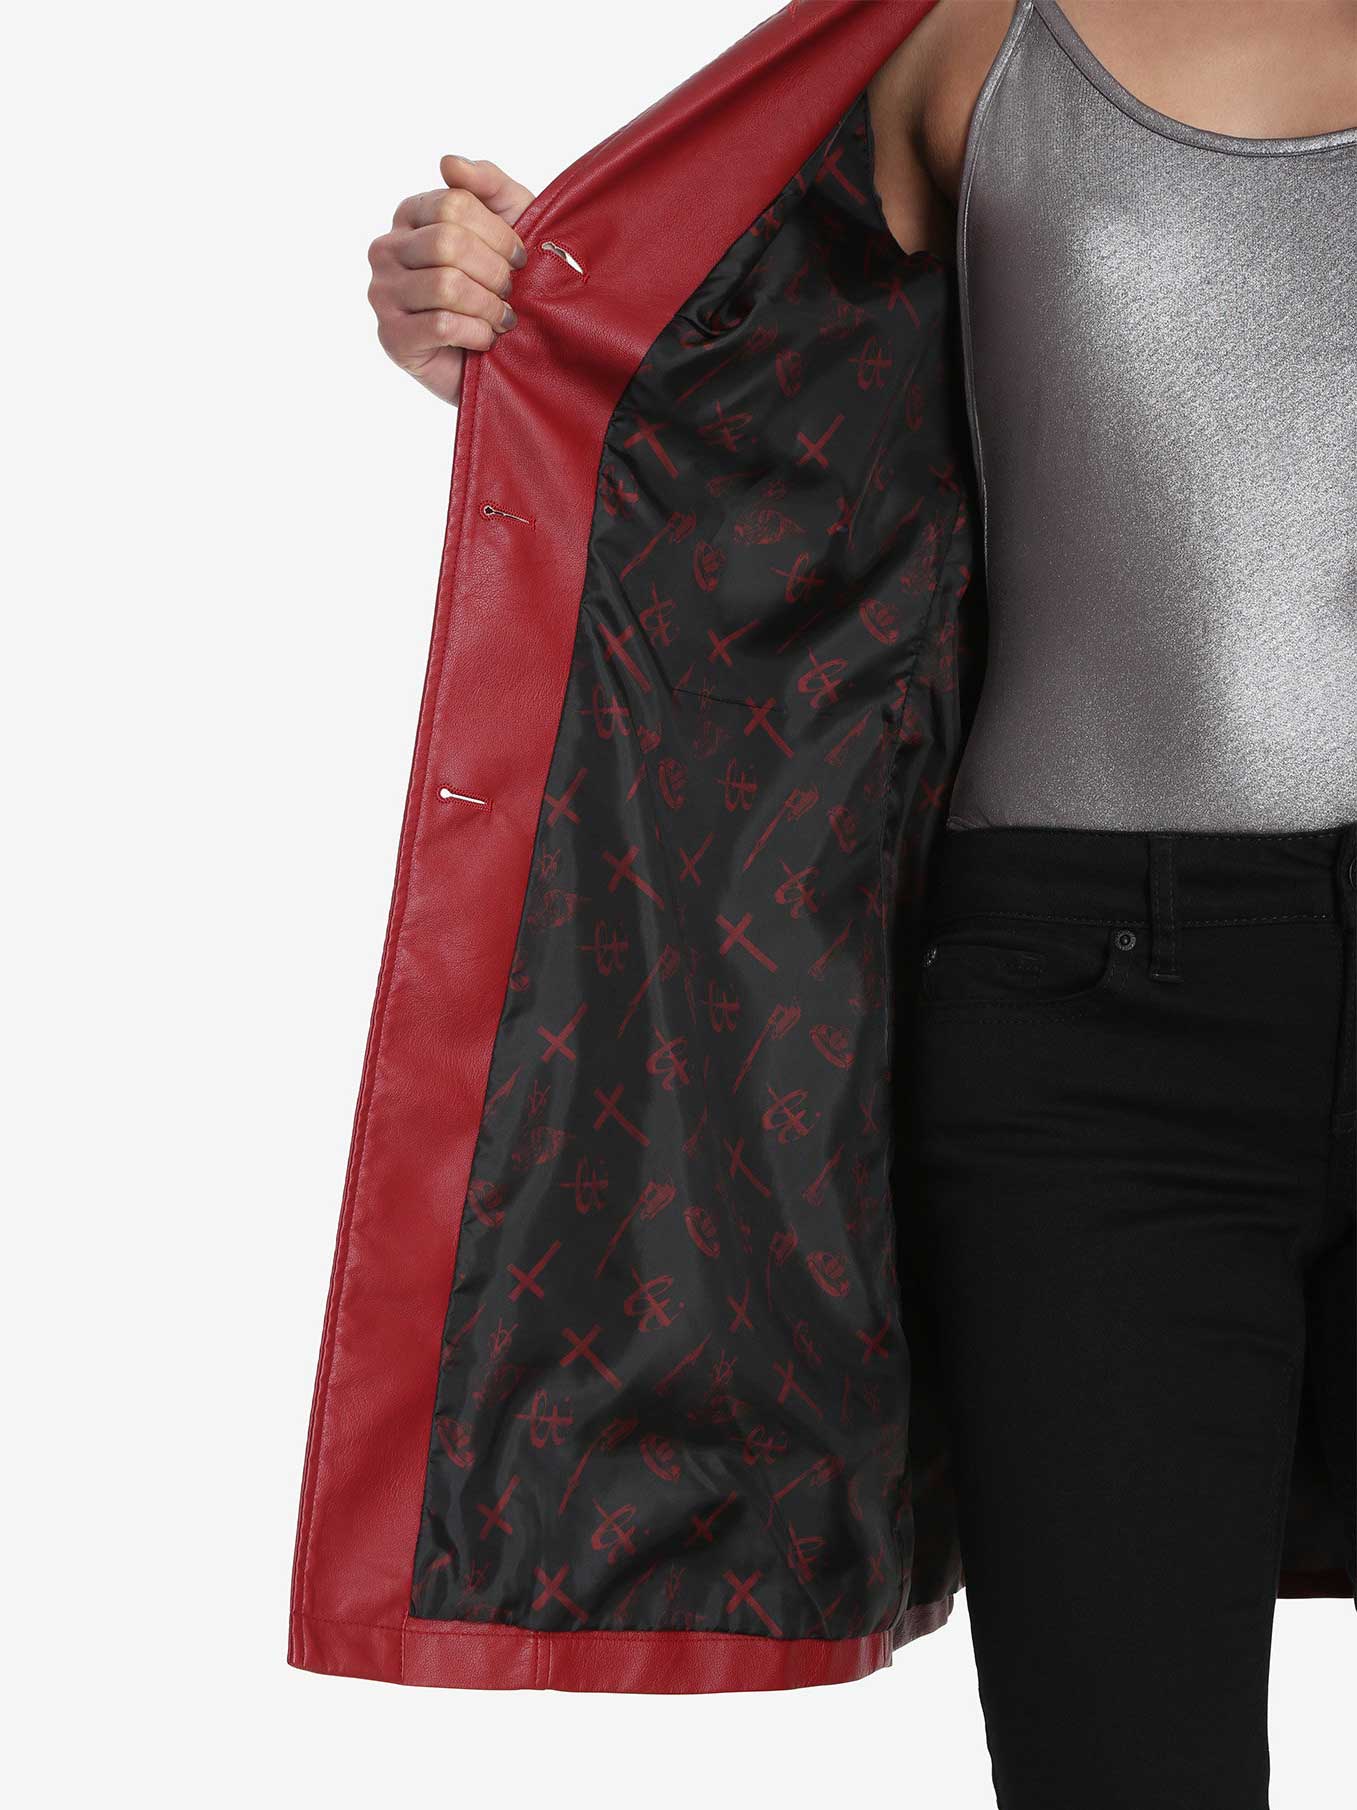 long red leather jacket with black satin lining